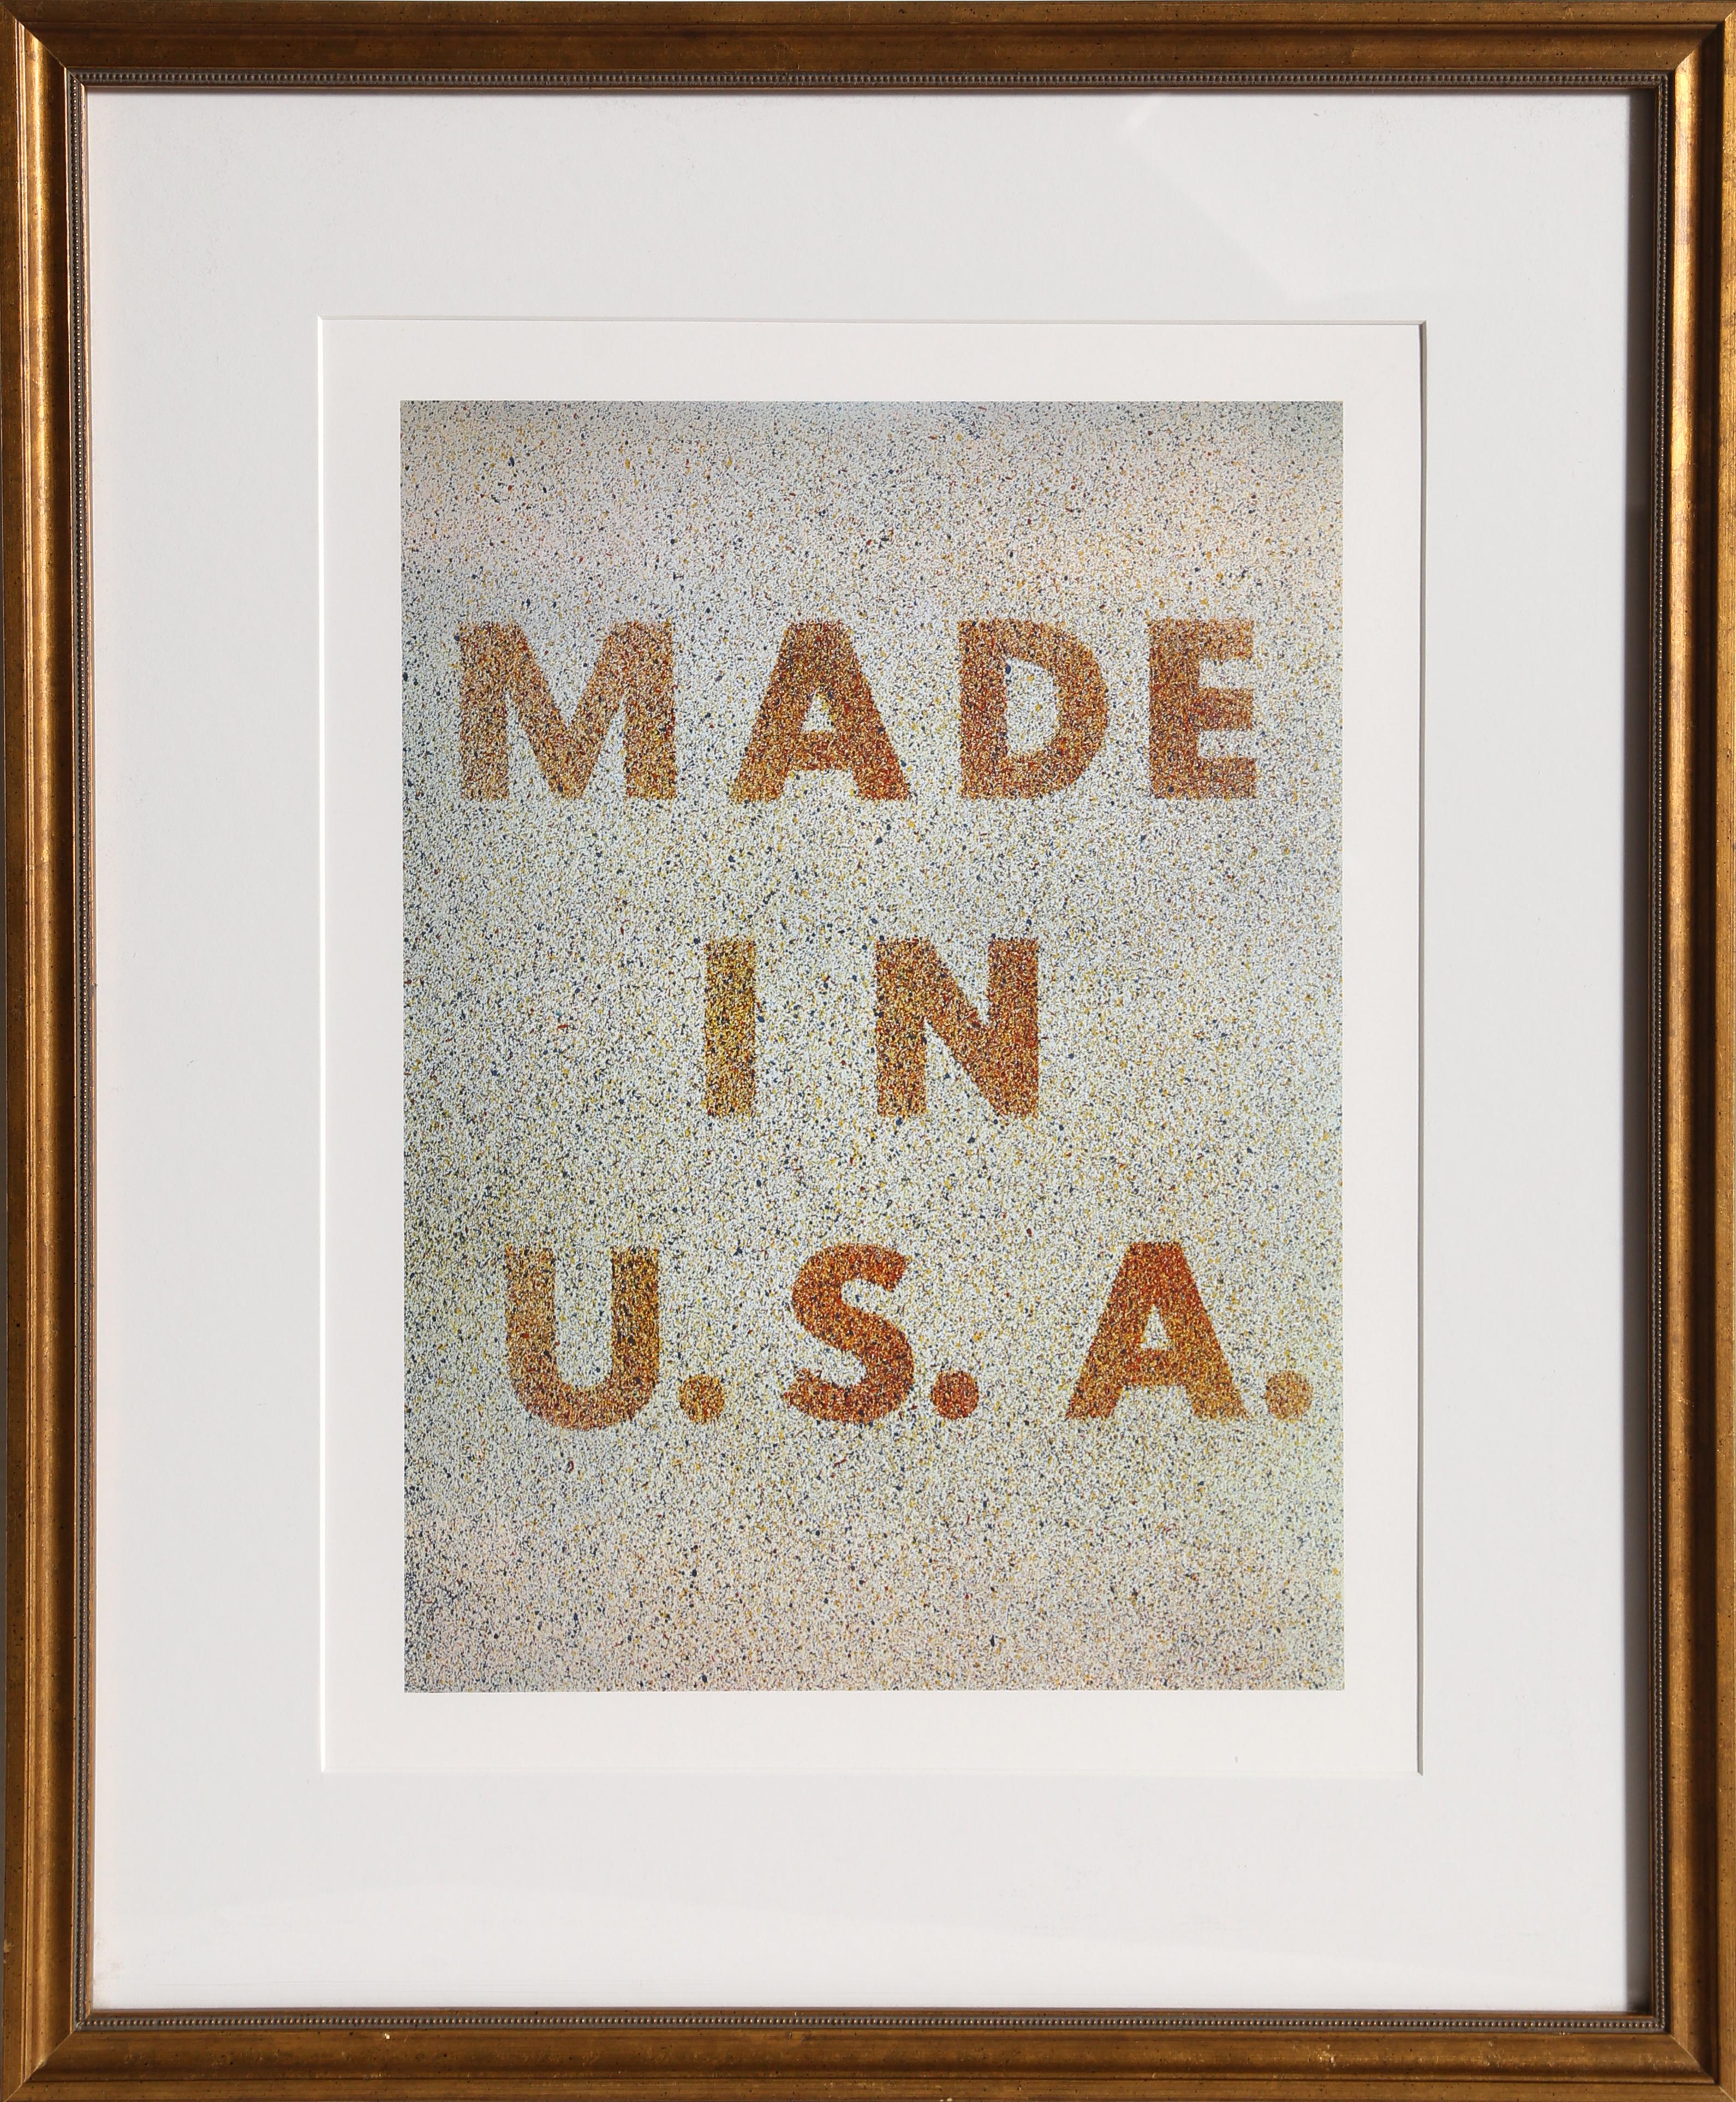 Artist: after Ed Ruscha
Title: America: Her Best Product (Made in USA) from the Kent Bicentennial Portfolio
Year: 1975
Medium: Offset Lithograph (unsigned)
Image: 13 x 9 inches
Paper Size: 17 x 14 inches
Frame: 21 x 17.5 inches

An original fine art